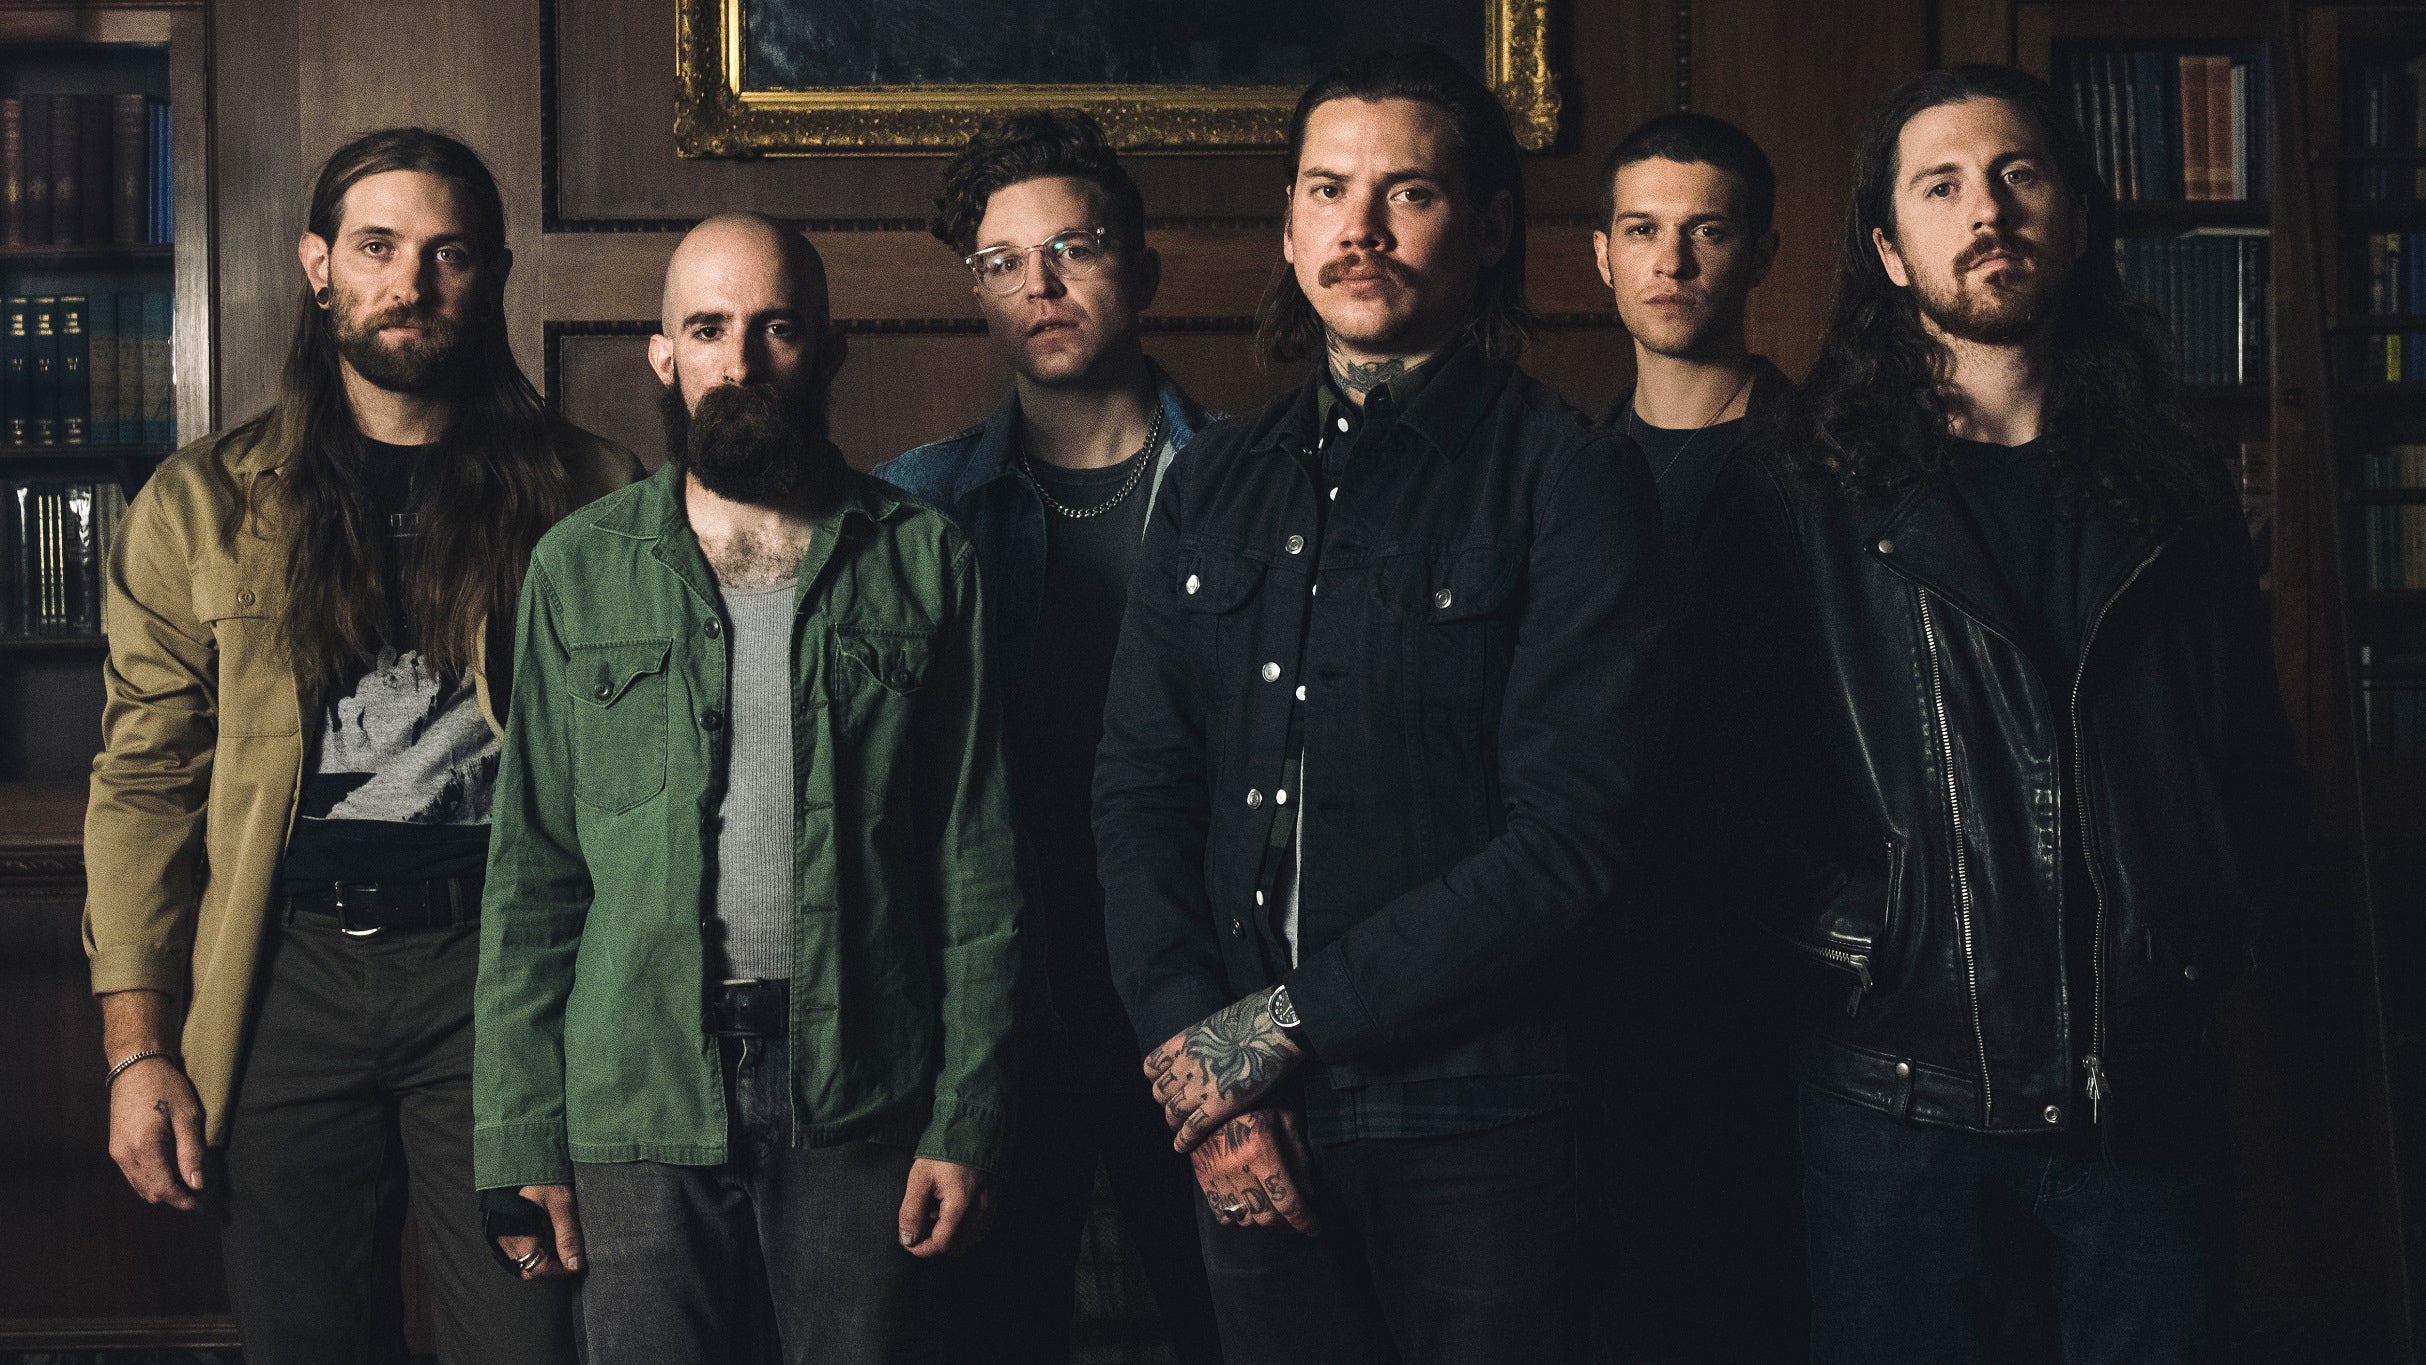 The Devil Wears Prada & Fit For A King: METALCORE DROPOUTS in Cincinnati promo photo for Official Platinum Onsale presale offer code